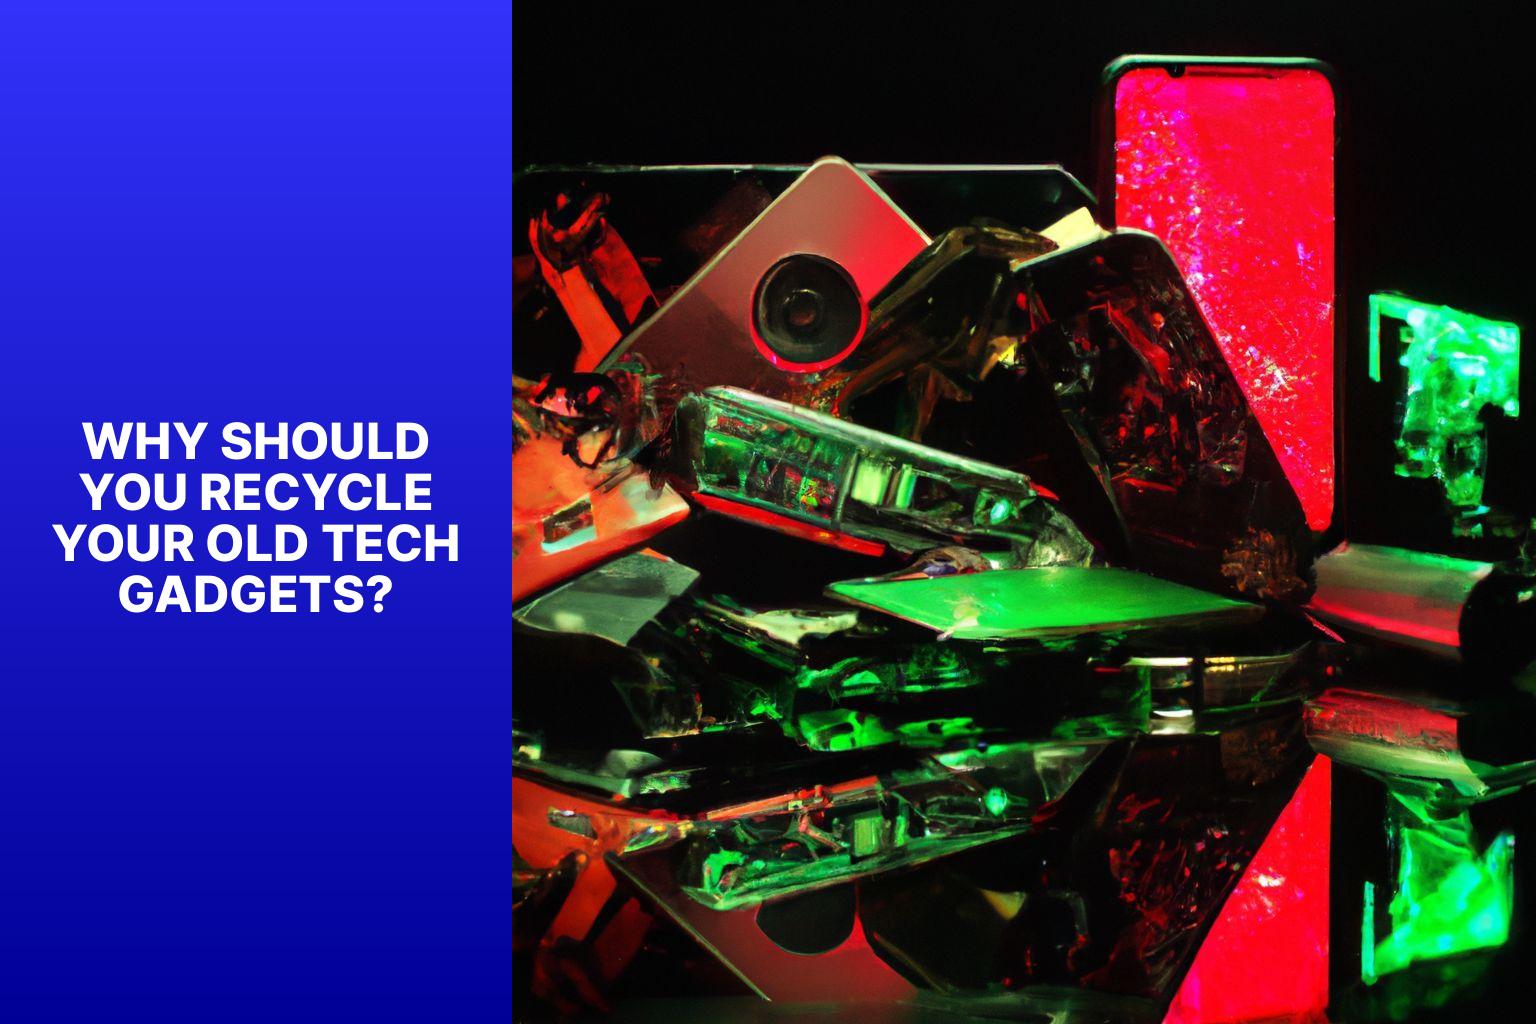 Why Should You Recycle Your Old Tech Gadgets? - How to Recycle Your Old Tech Gadgets 